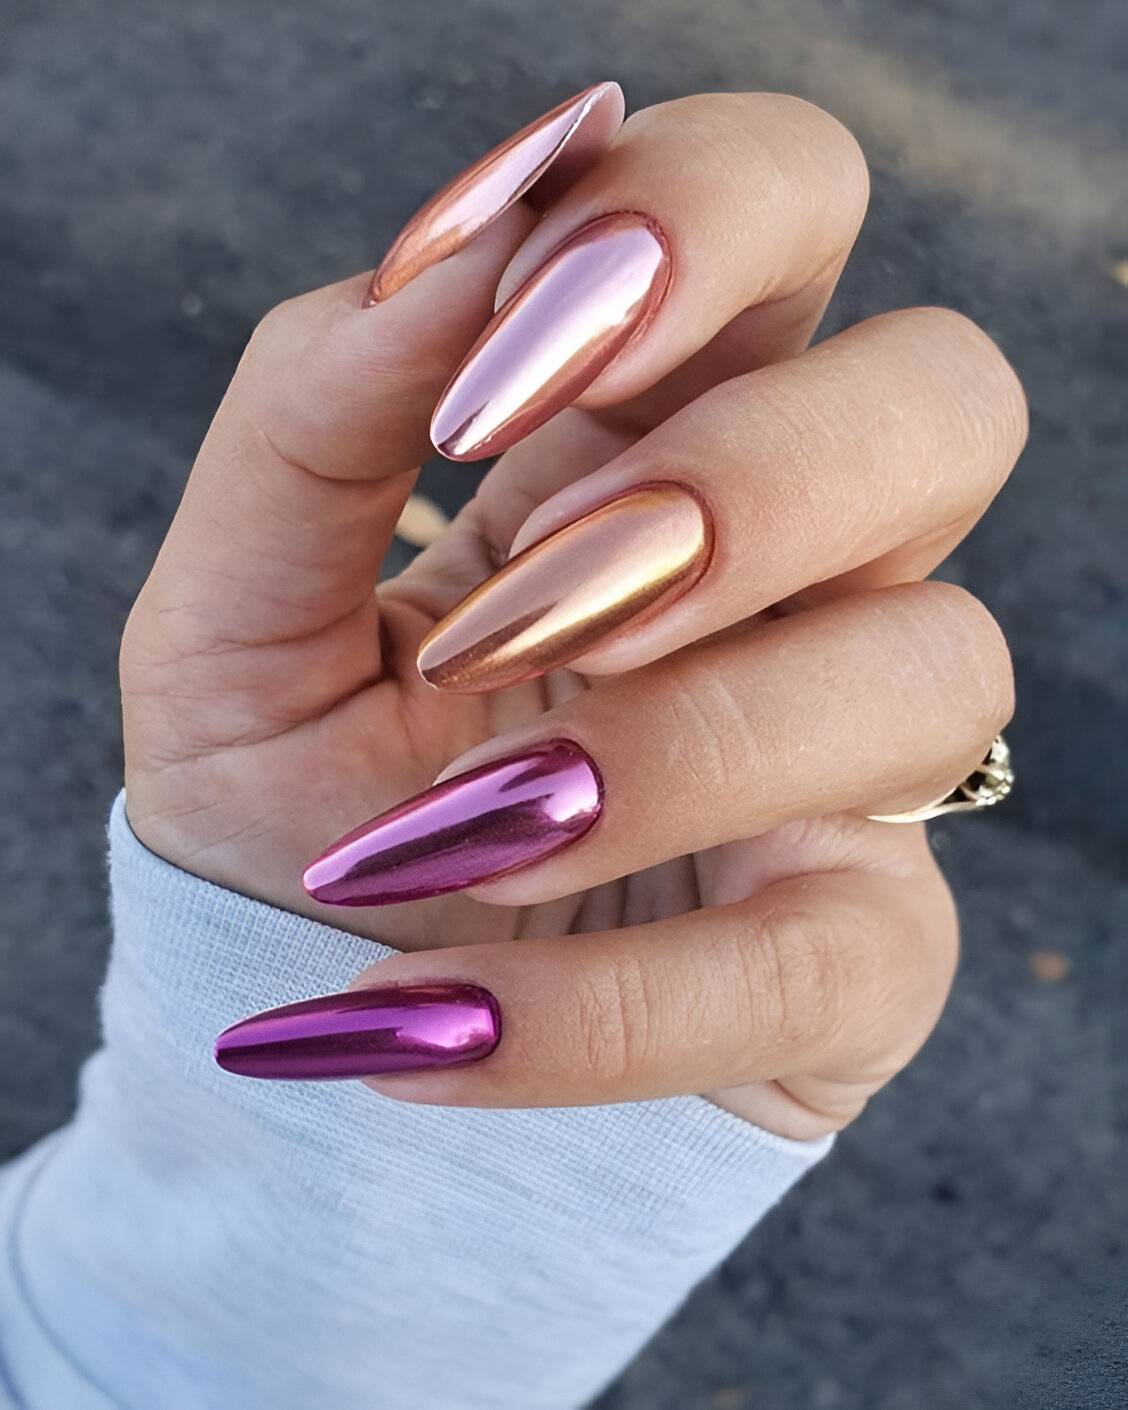 30 Chic Chrome Nail Designs For The Ultimate Glam Look - 203